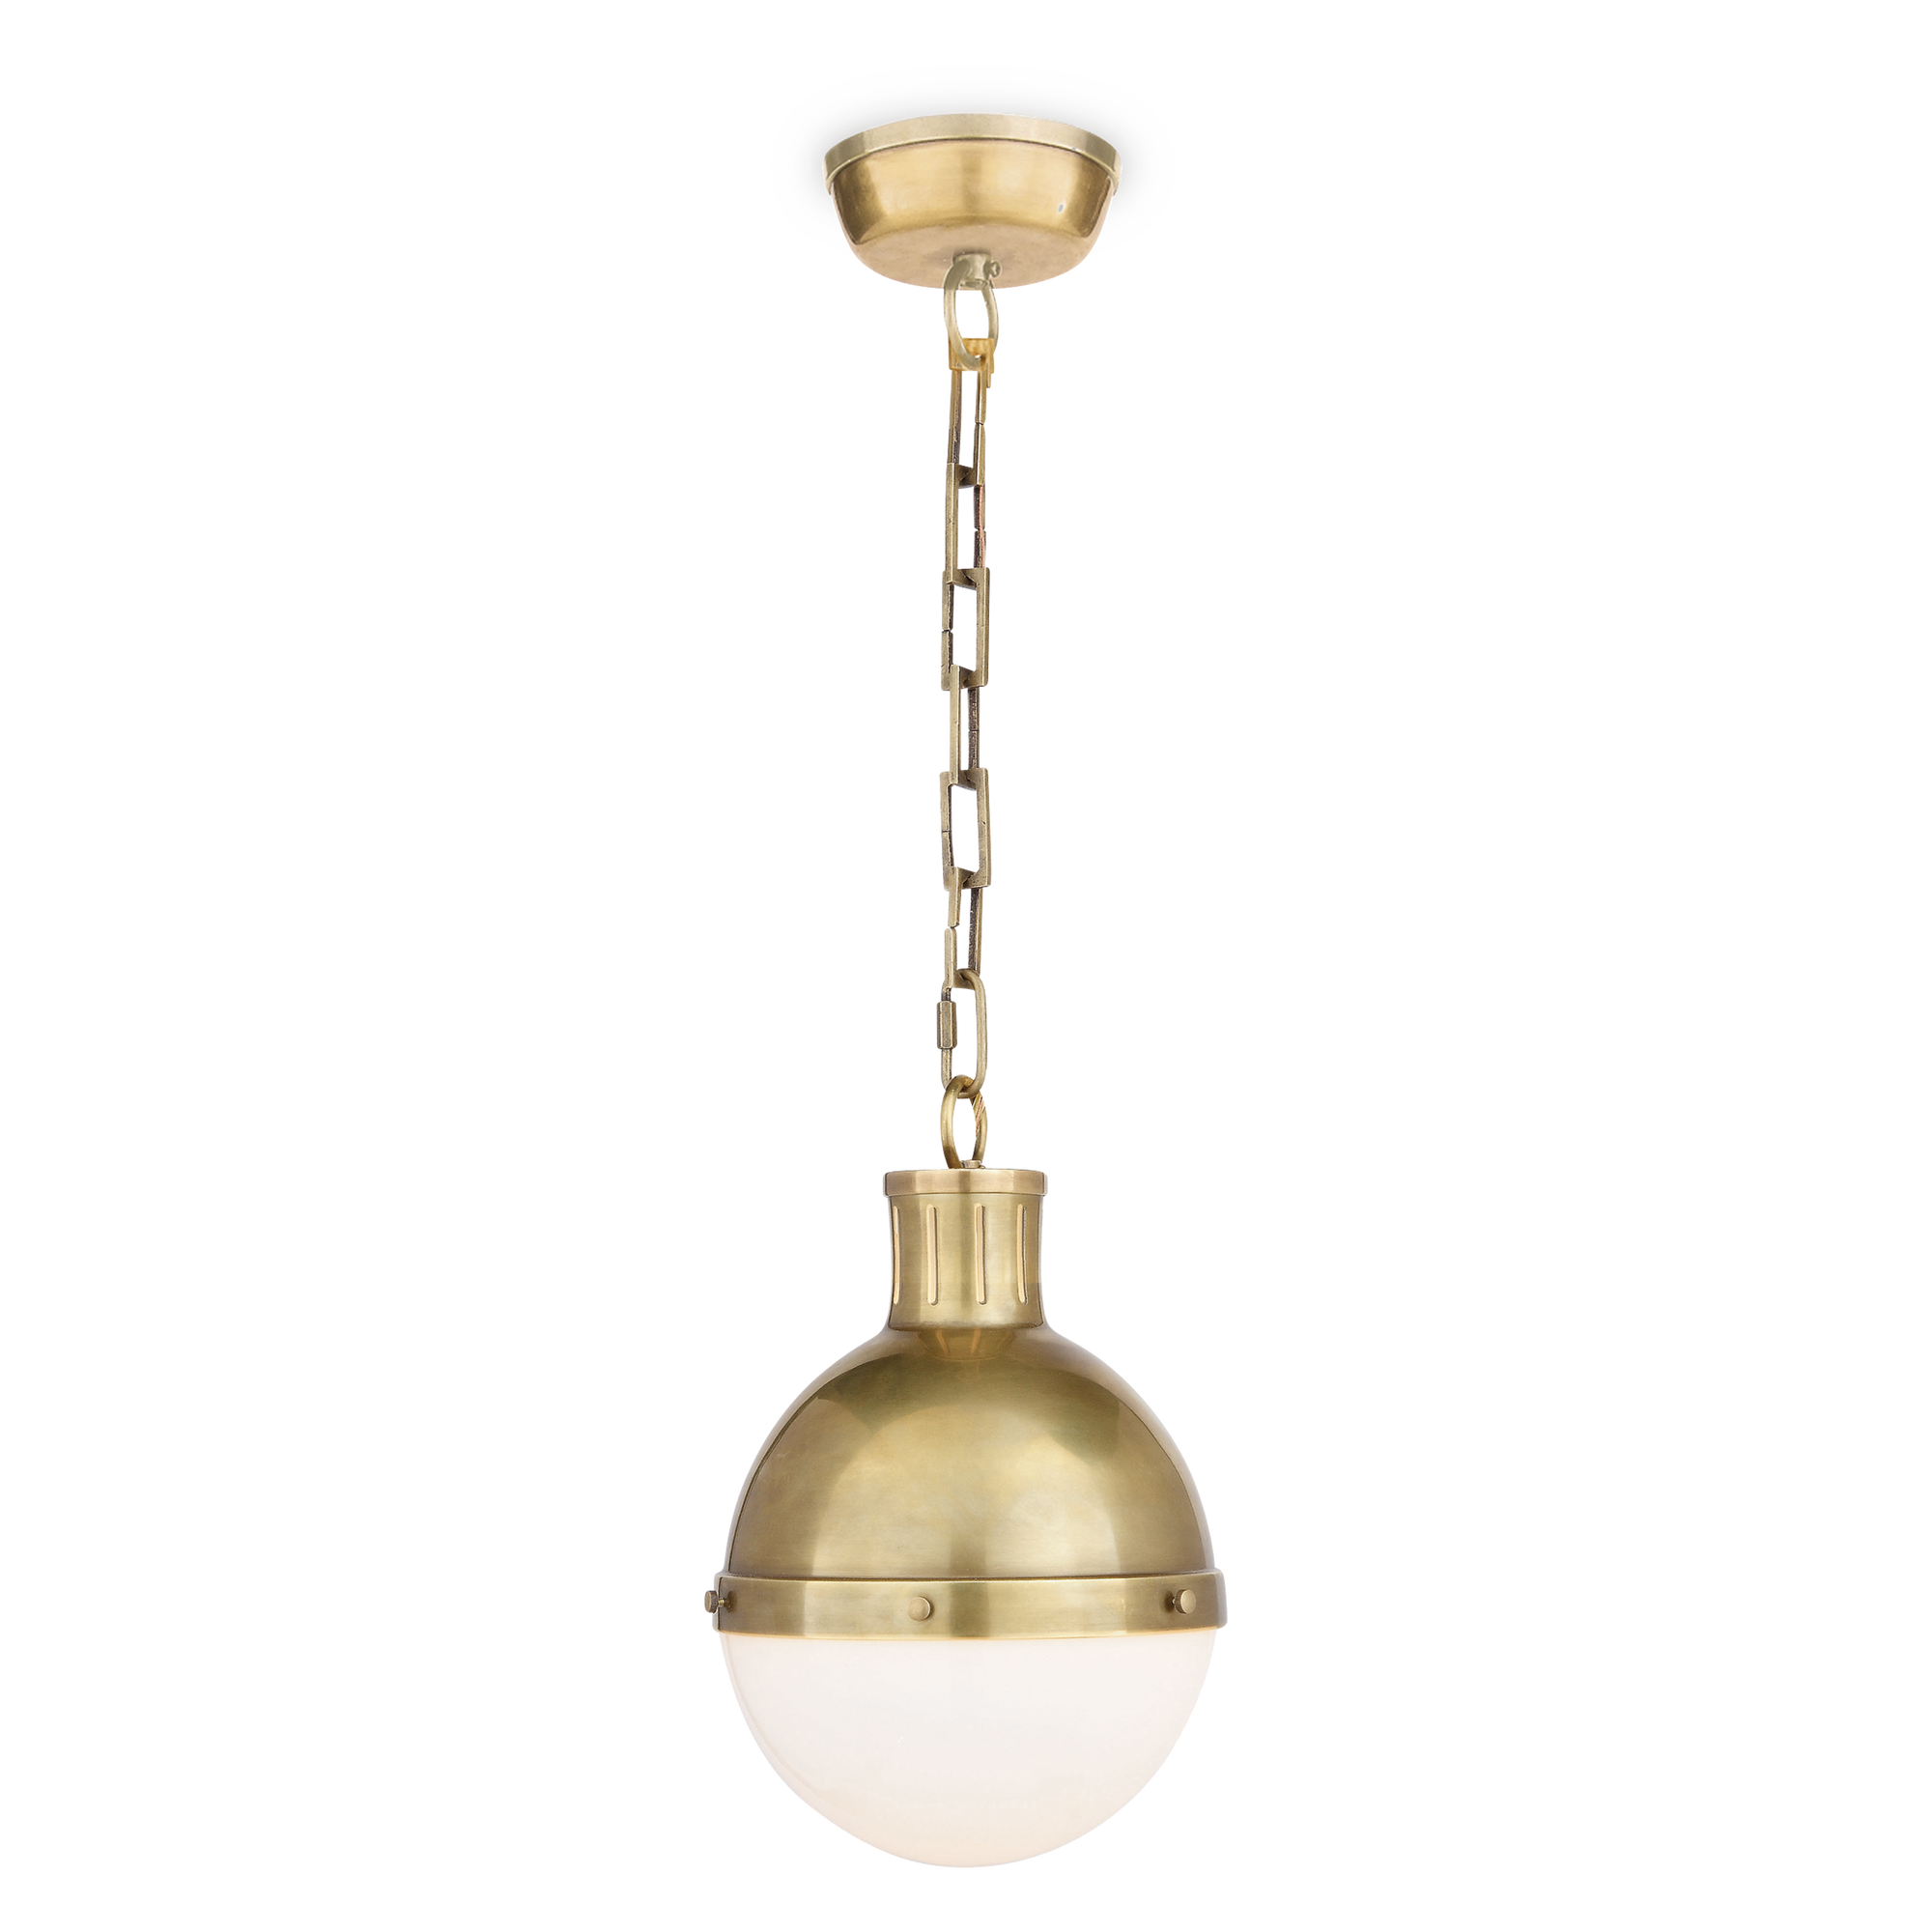 A gorgeous small globe pendant with white glass and hand-rubbed antique brass.